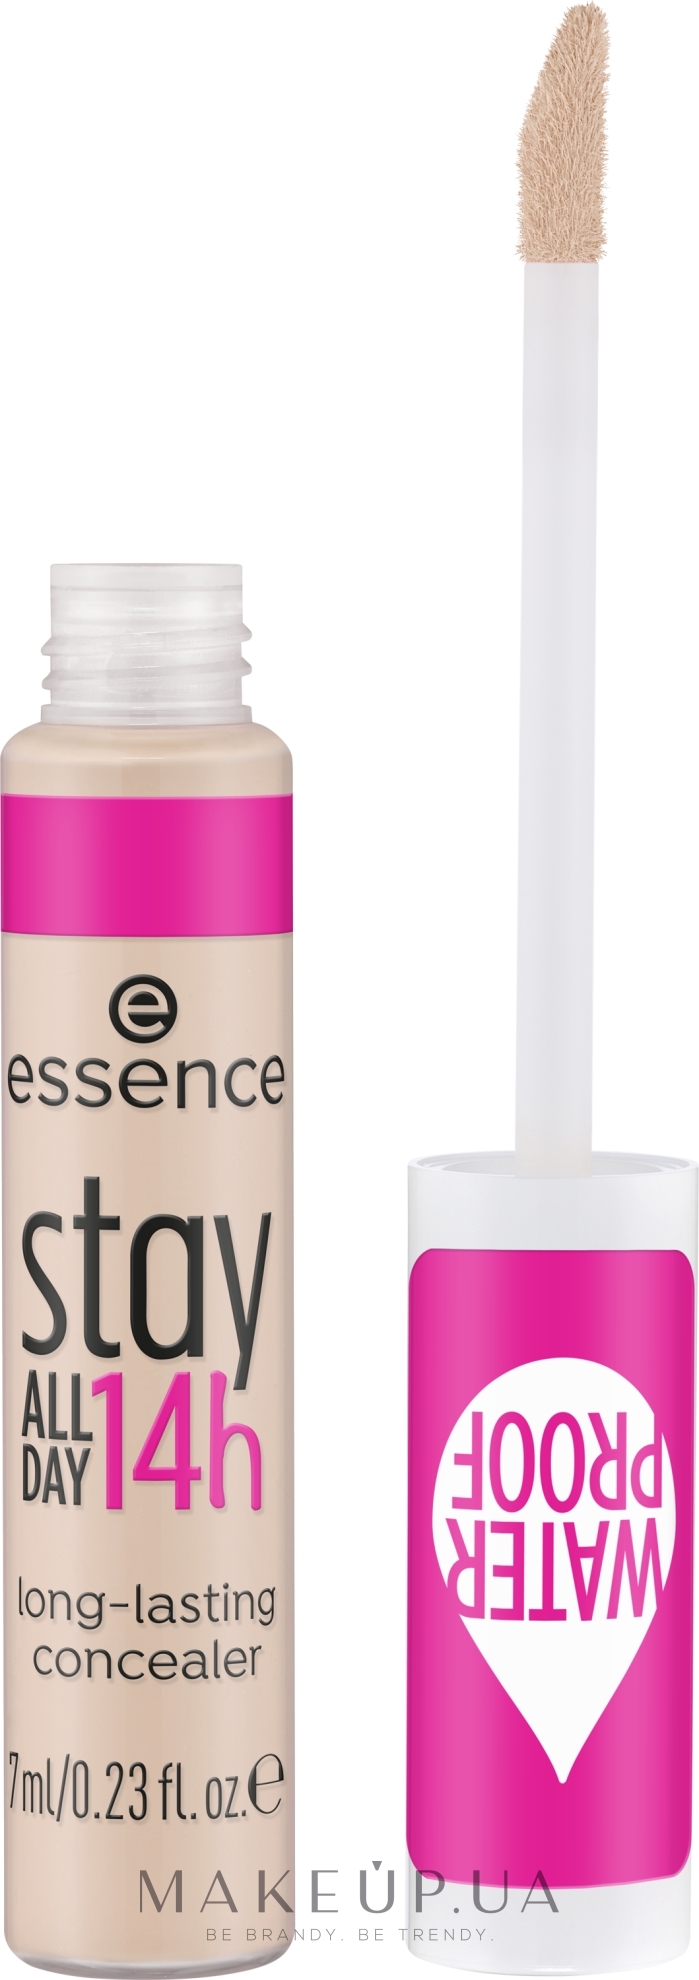 Essence Stay All Day 14h Long-lasting Concealer